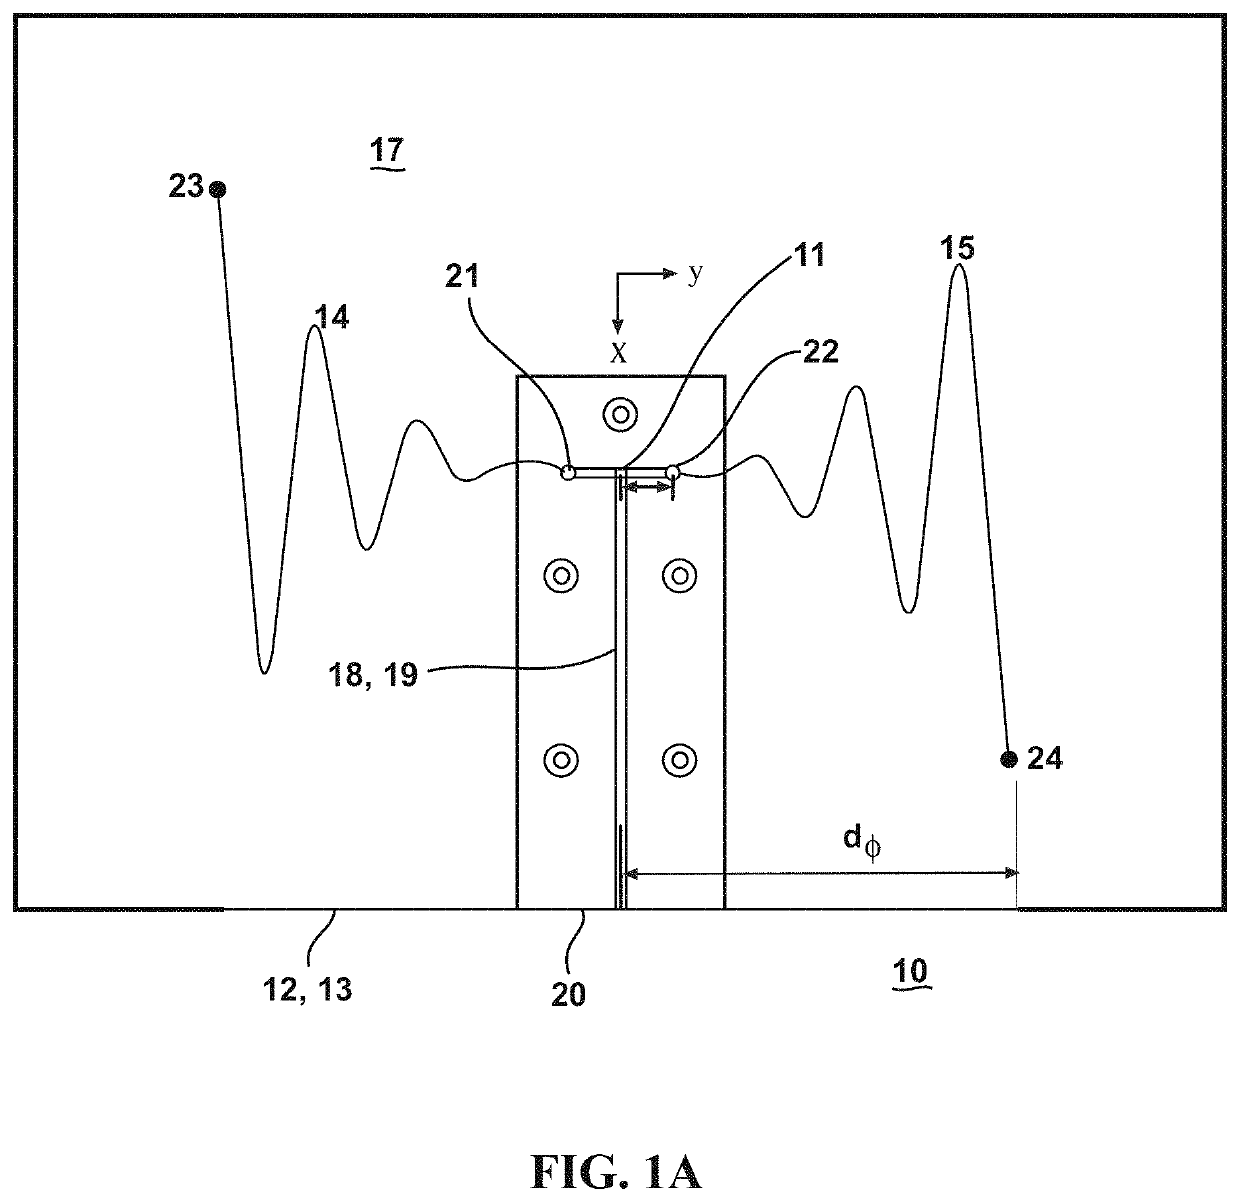 Physically reconfigurable structurally embedded vascular antenna and method of making